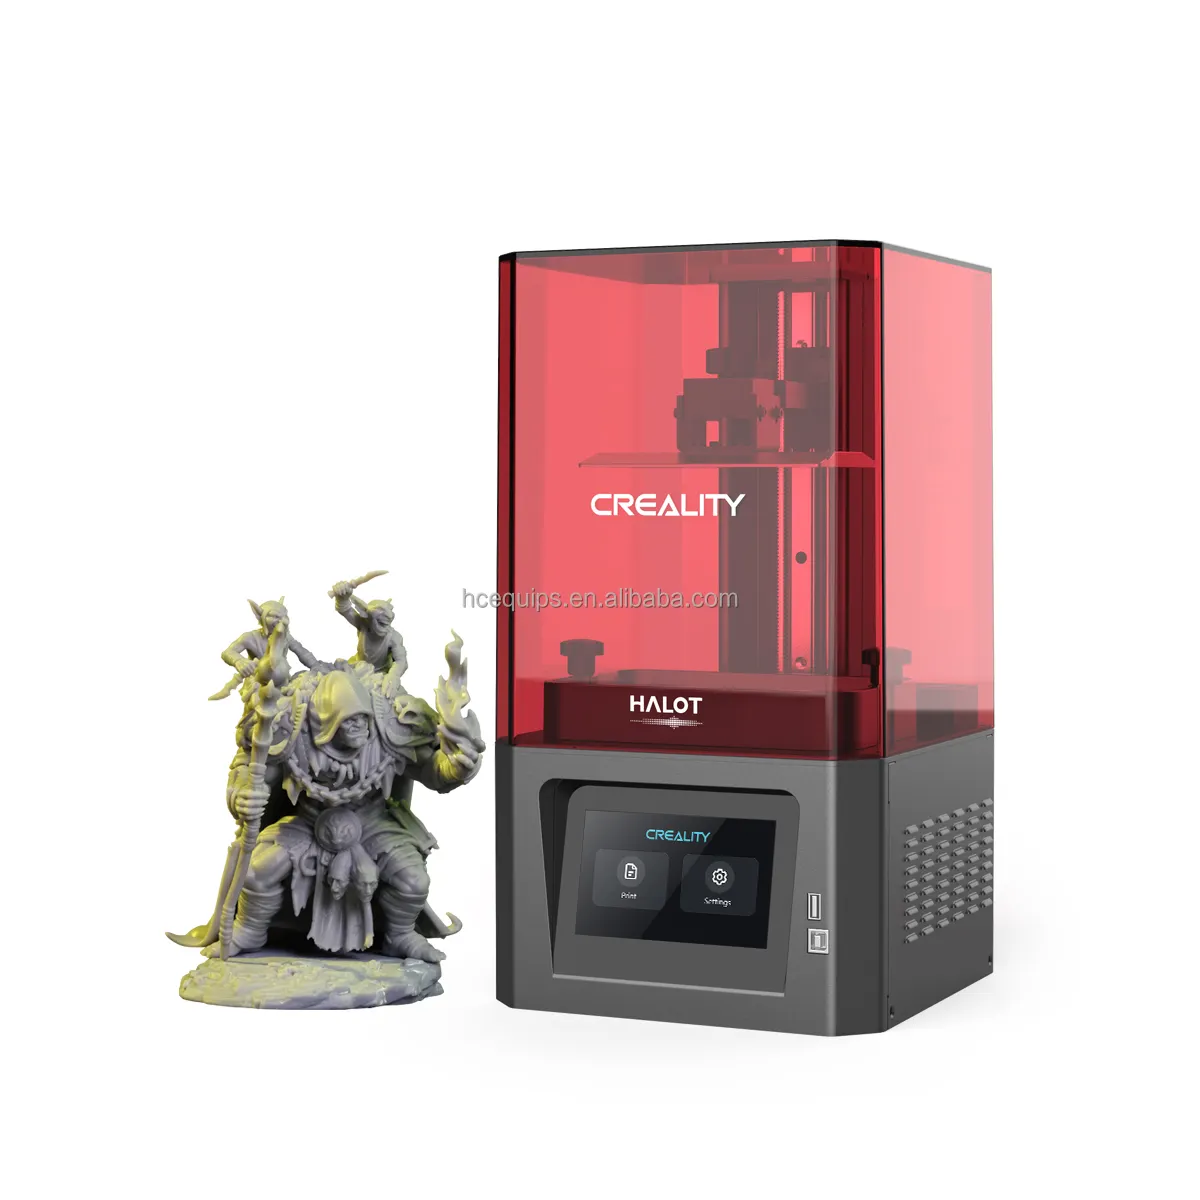 Ready to use creality LCD inexpensive resin 3D printer is suitable for toy handmade precision handicrafts